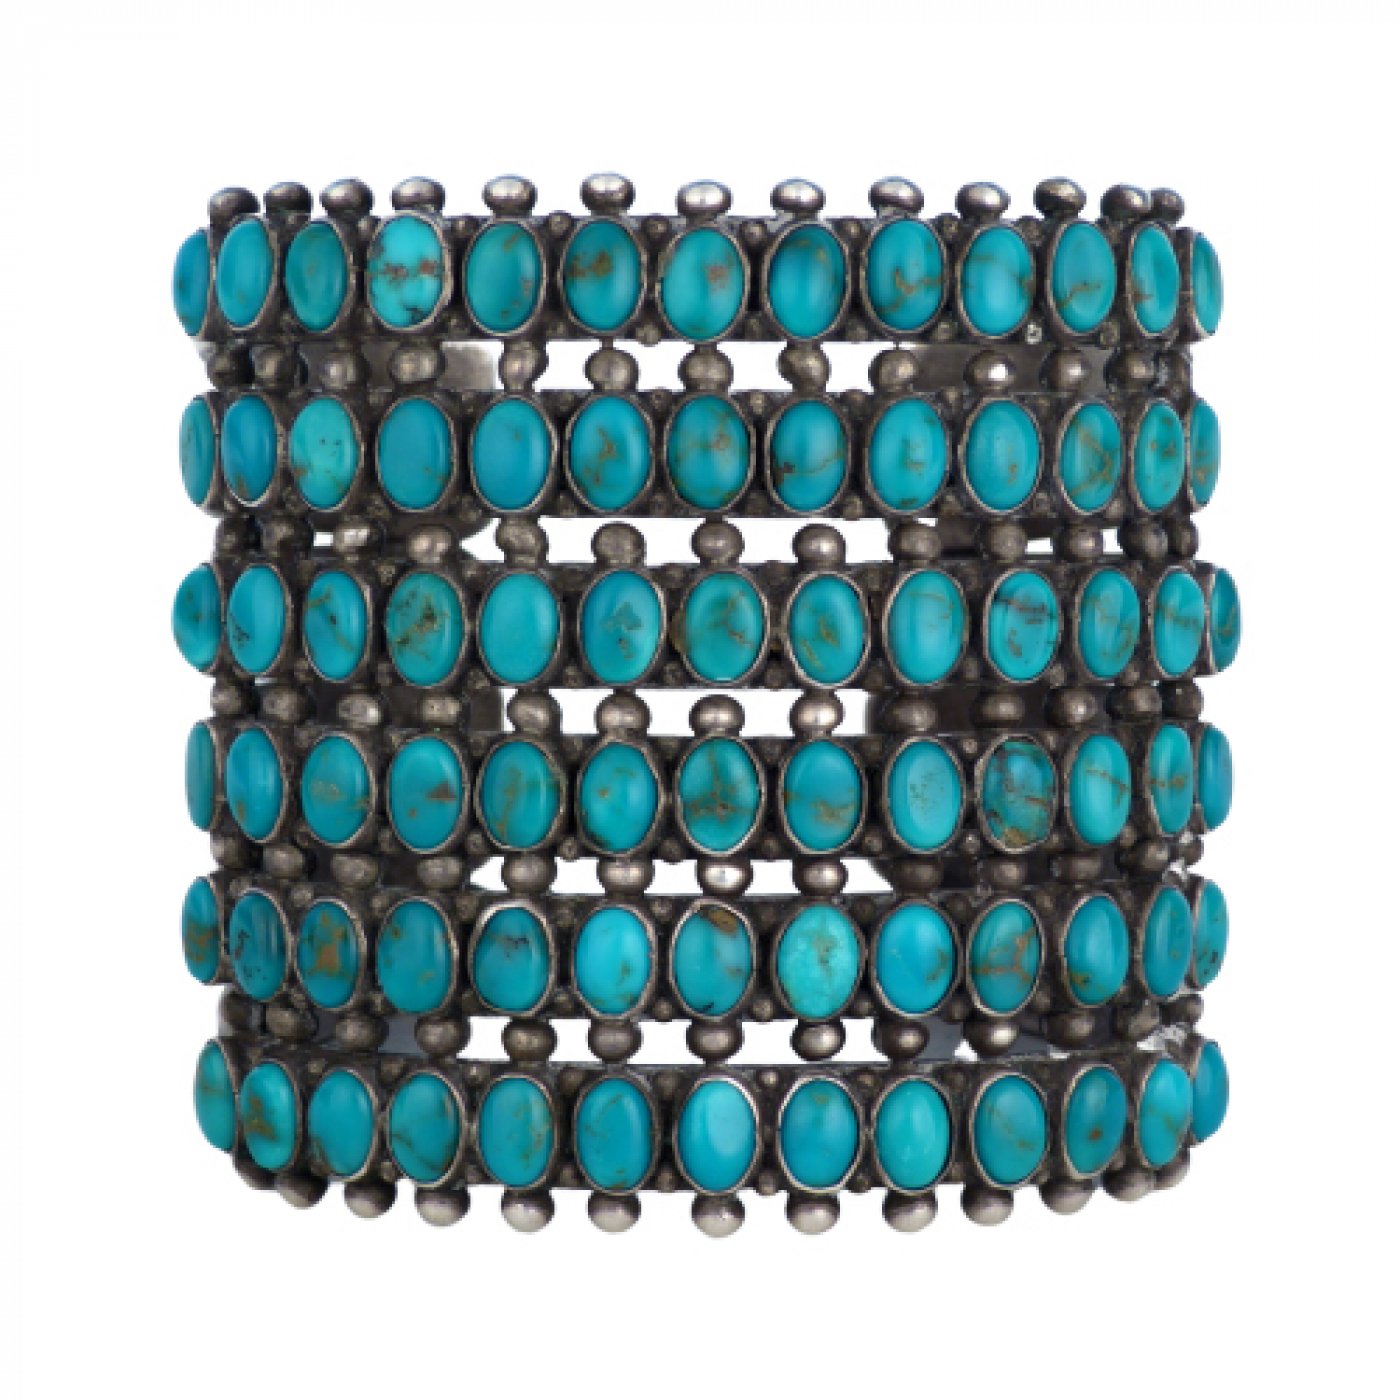 Navajo Stamped Silver Six Row Bracelet with Blue Gem Turquoise, c.1940 ...